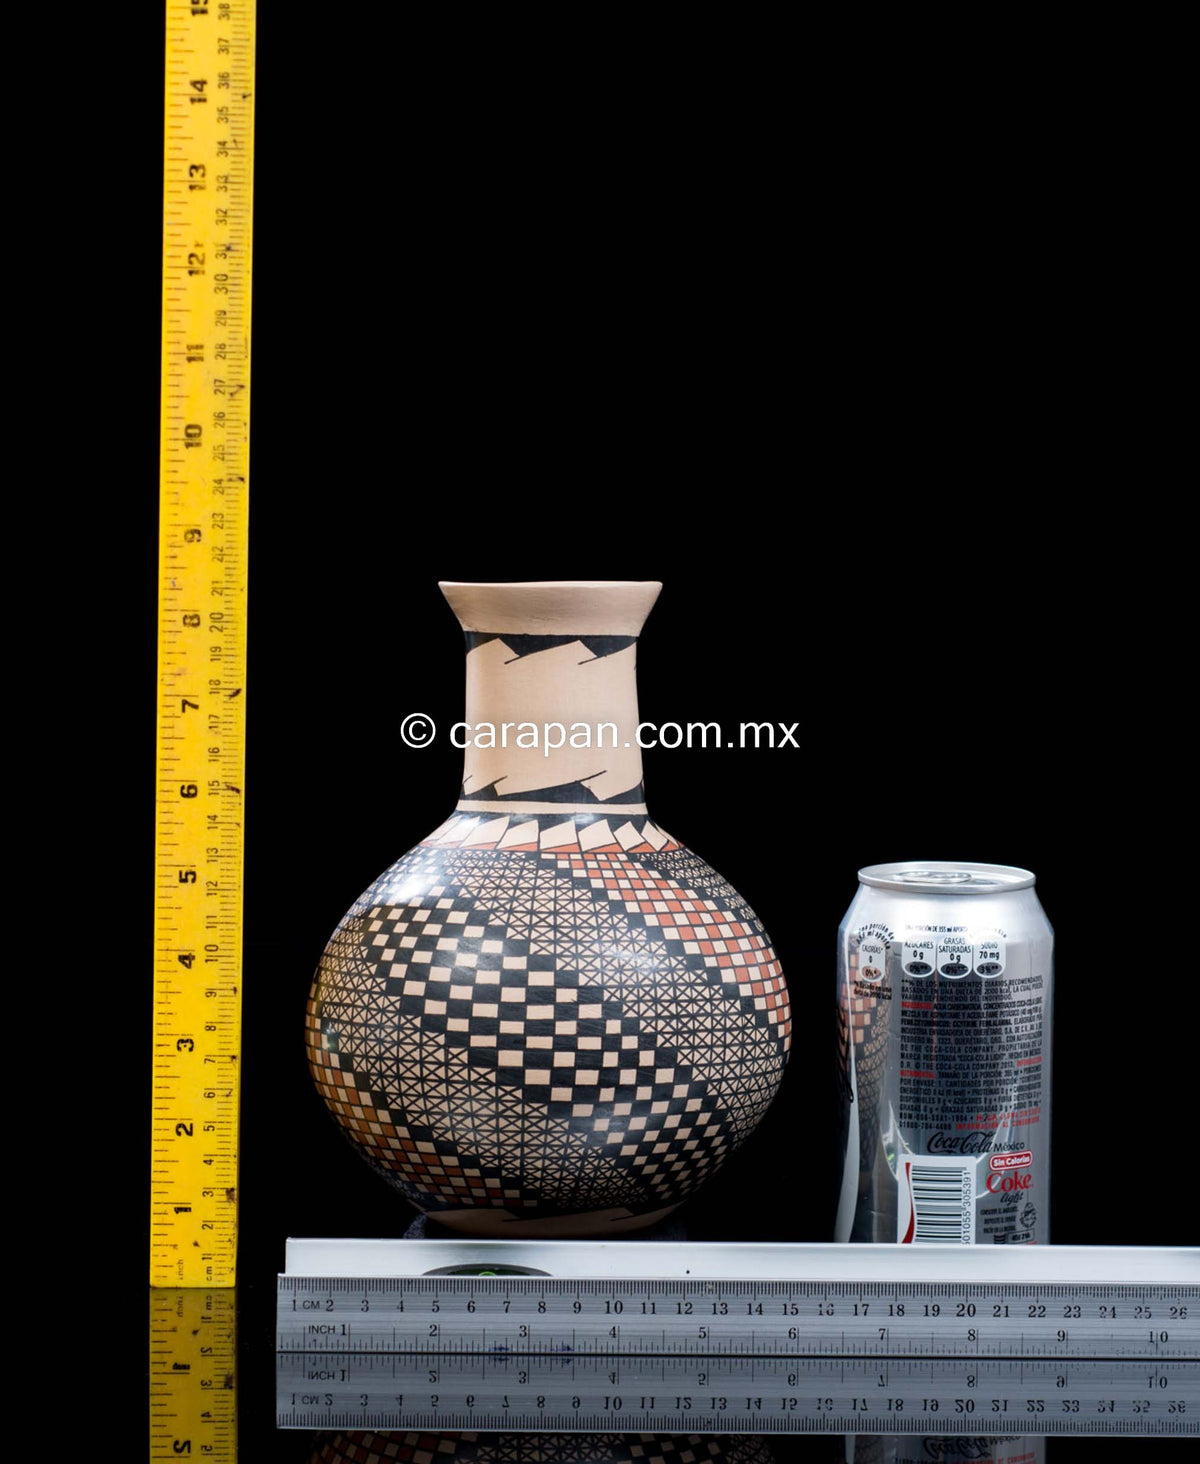 Mata Ortiz Ceramic pot with geometric pattern from Chihuahua Mexico